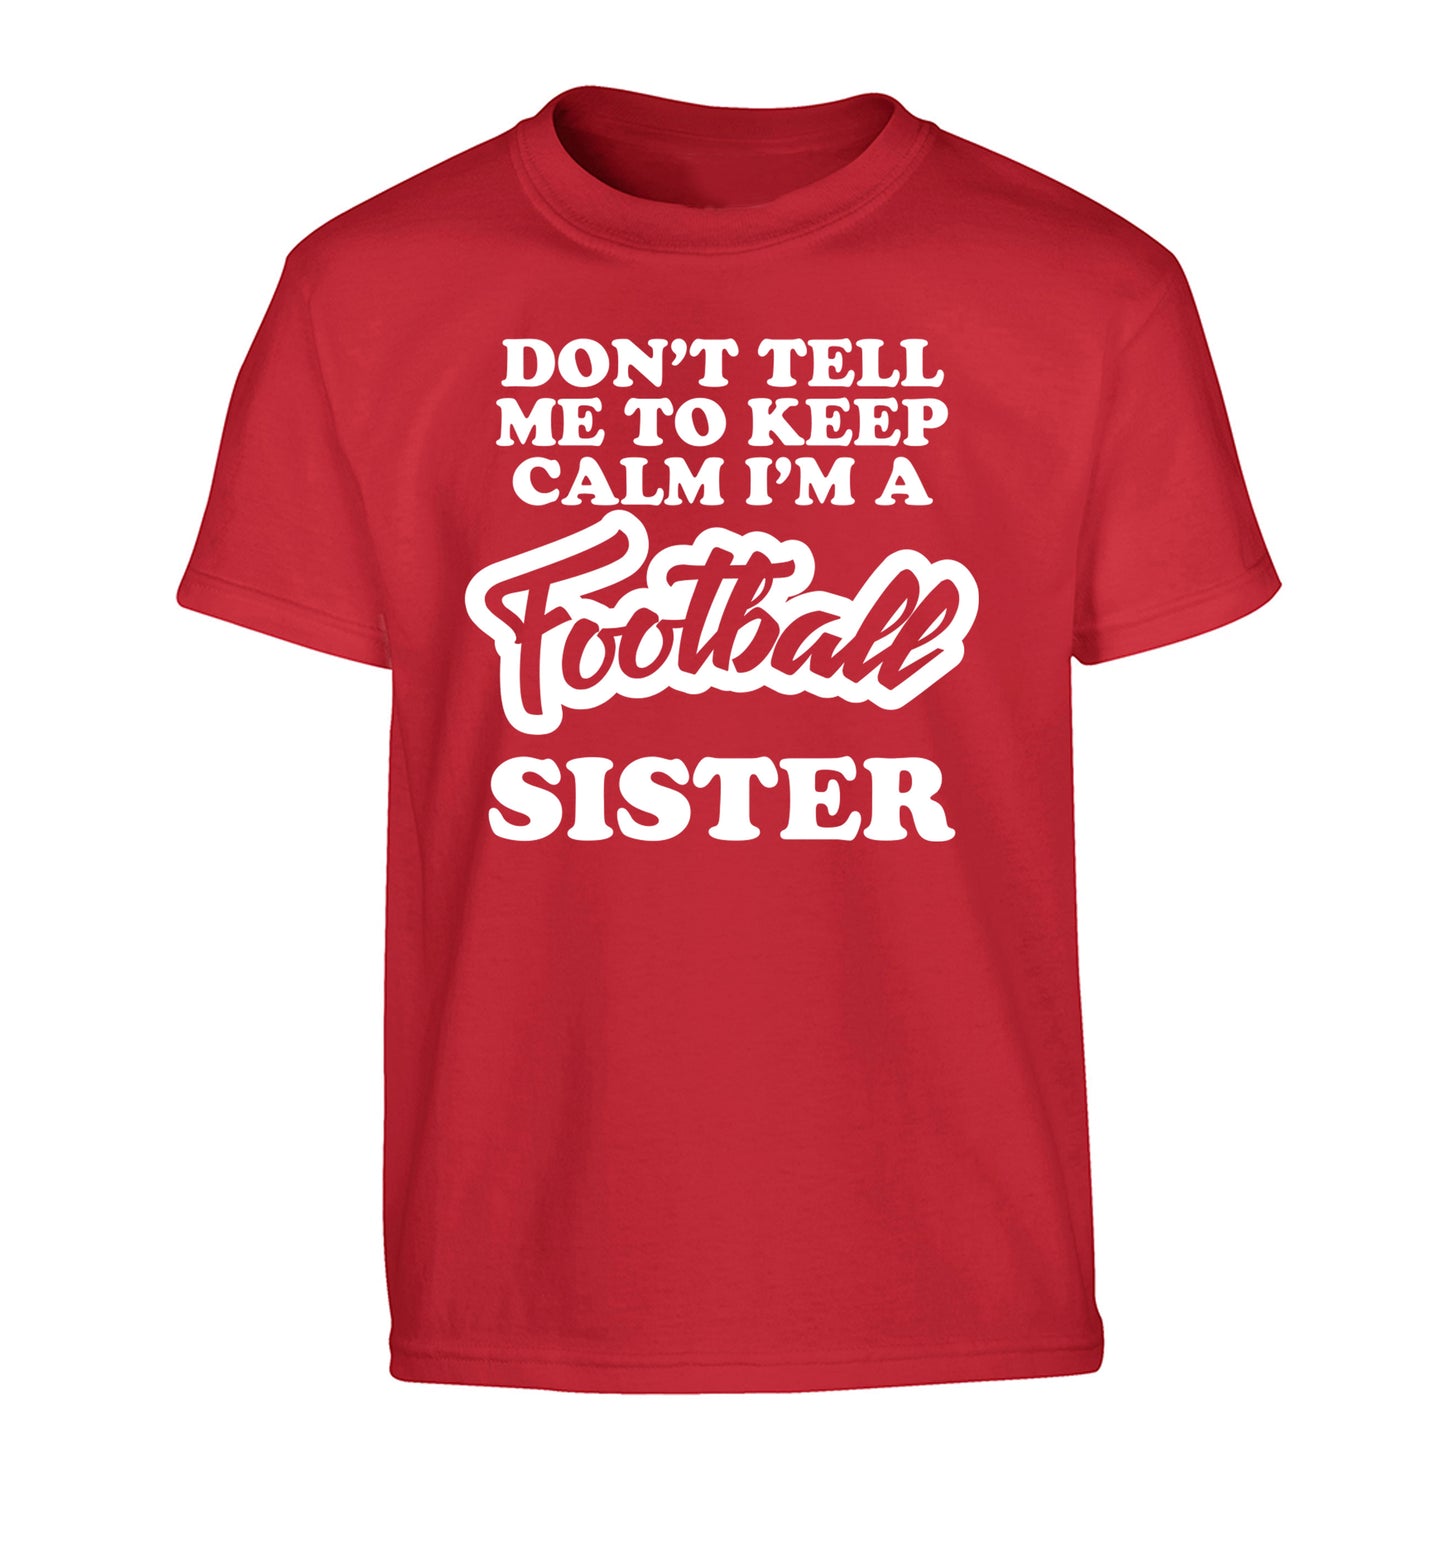 Don't tell me to keep calm I'm a football sister Children's red Tshirt 12-14 Years